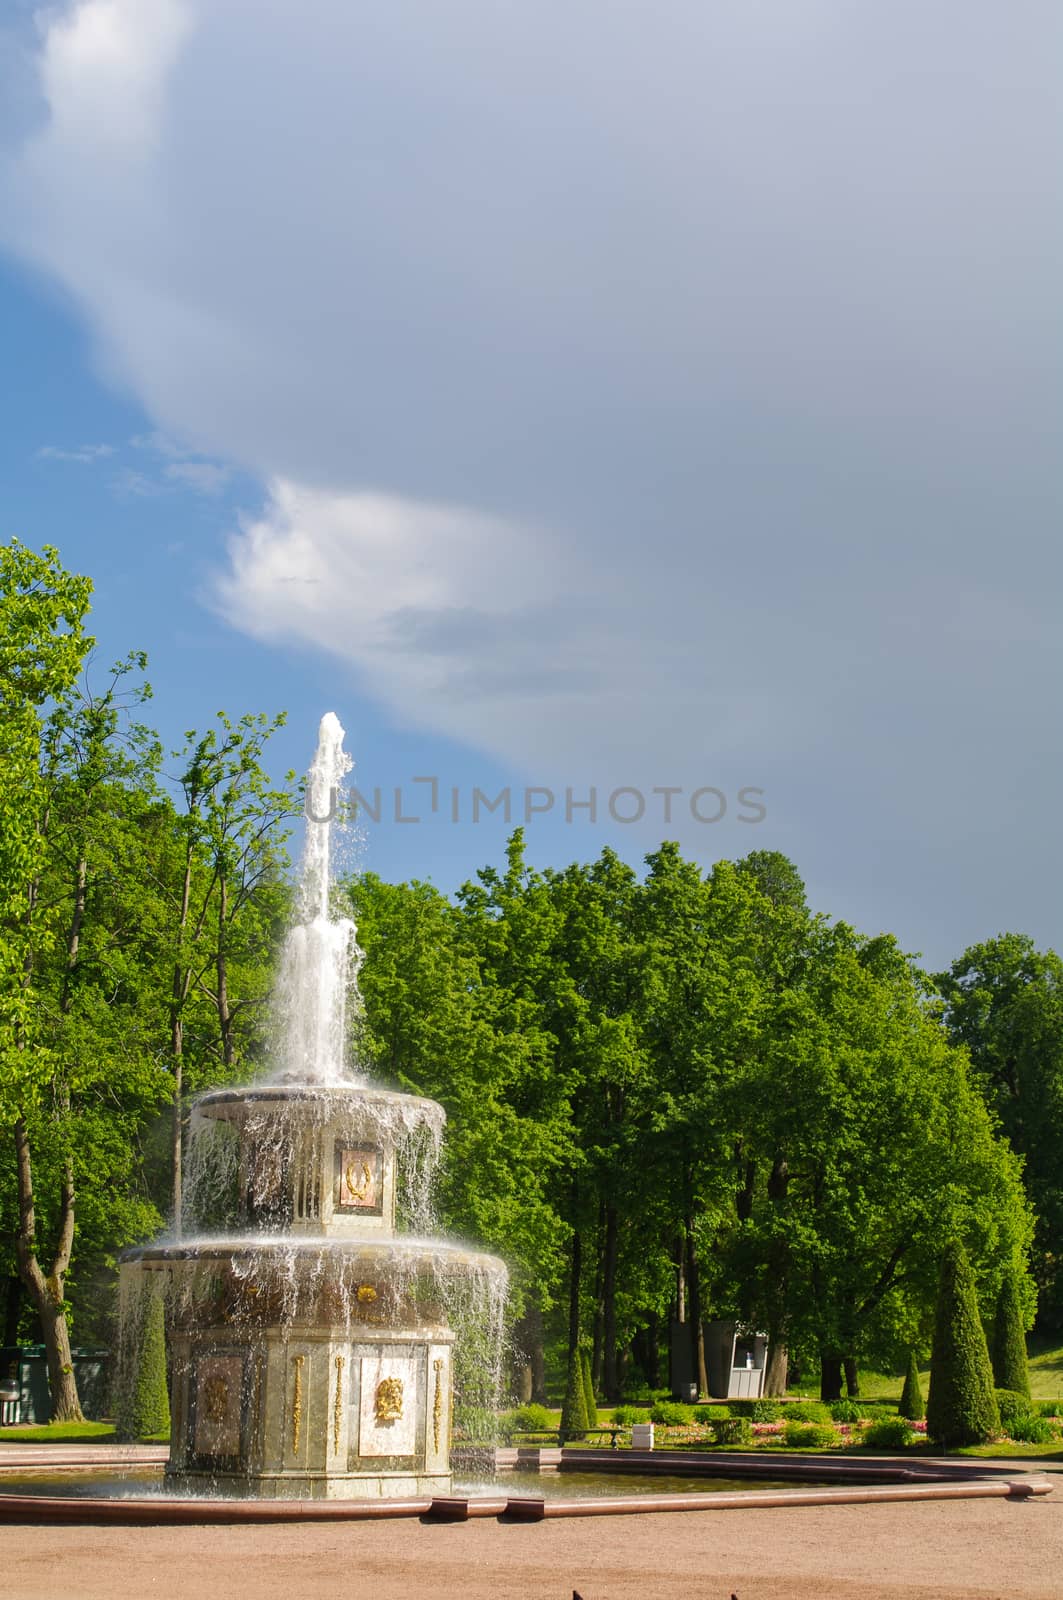 PETERHOF, SAINT PETERSBURG, RUSSIA - JUNE 06, 2014: Fountain in the Upper Park palace was included in the UNESCO World Heritage List by evolutionnow